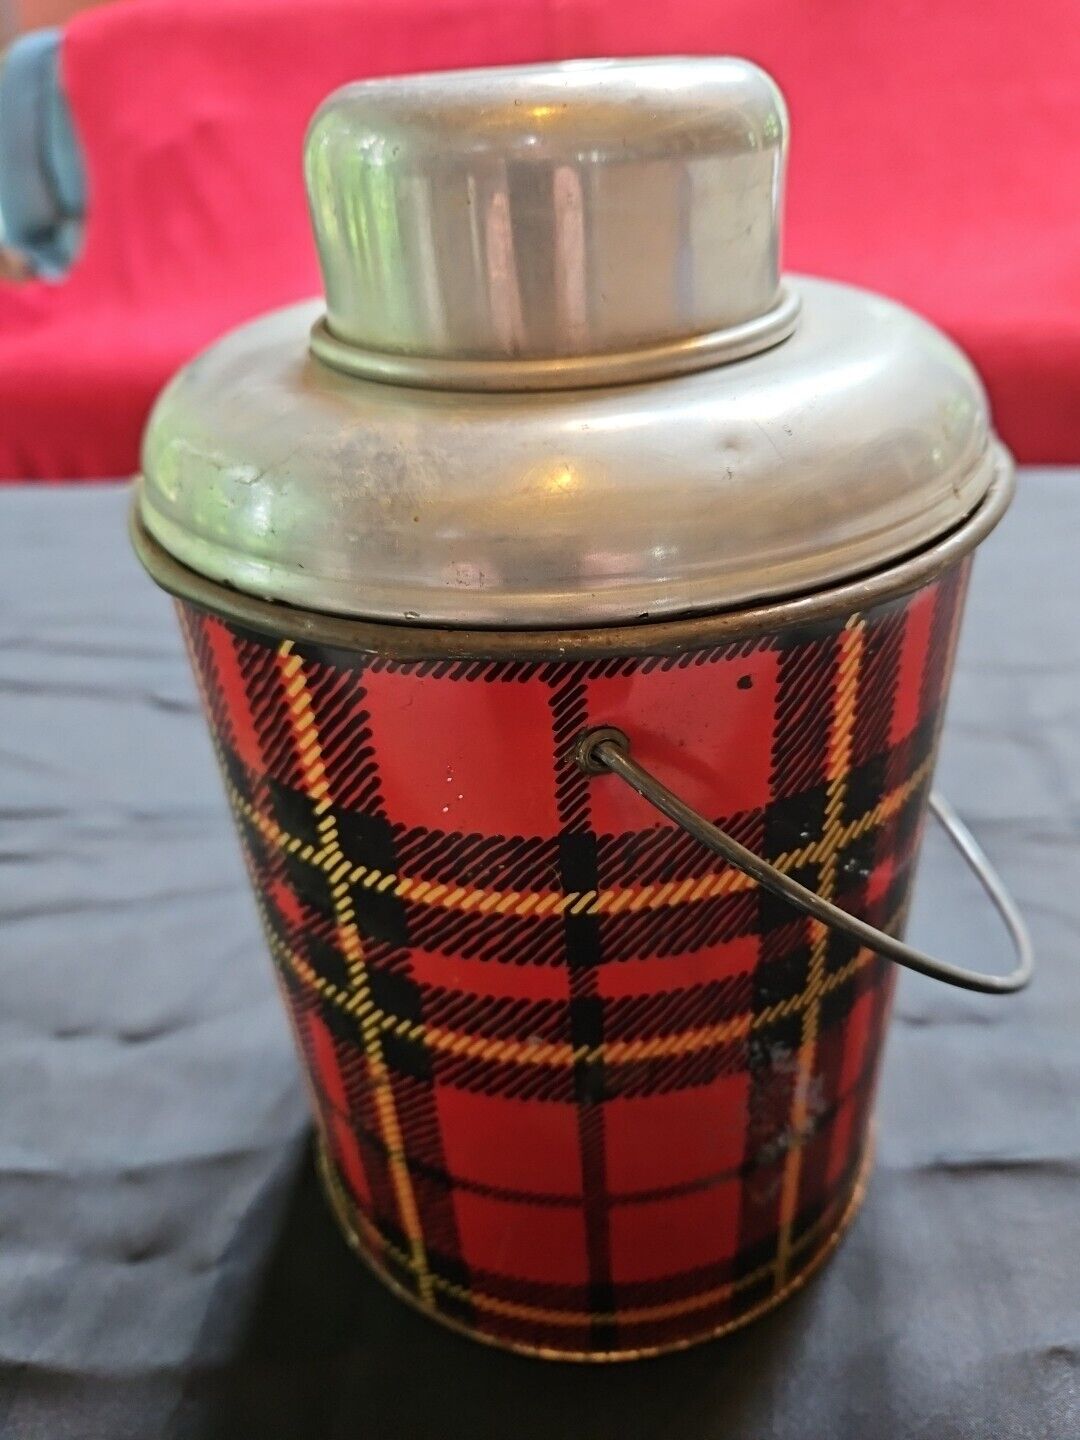 FARIS RED, YELLOW, AND BLACK PLAID HALF GALLON THERMOS GLASS INSIDE INSULATED